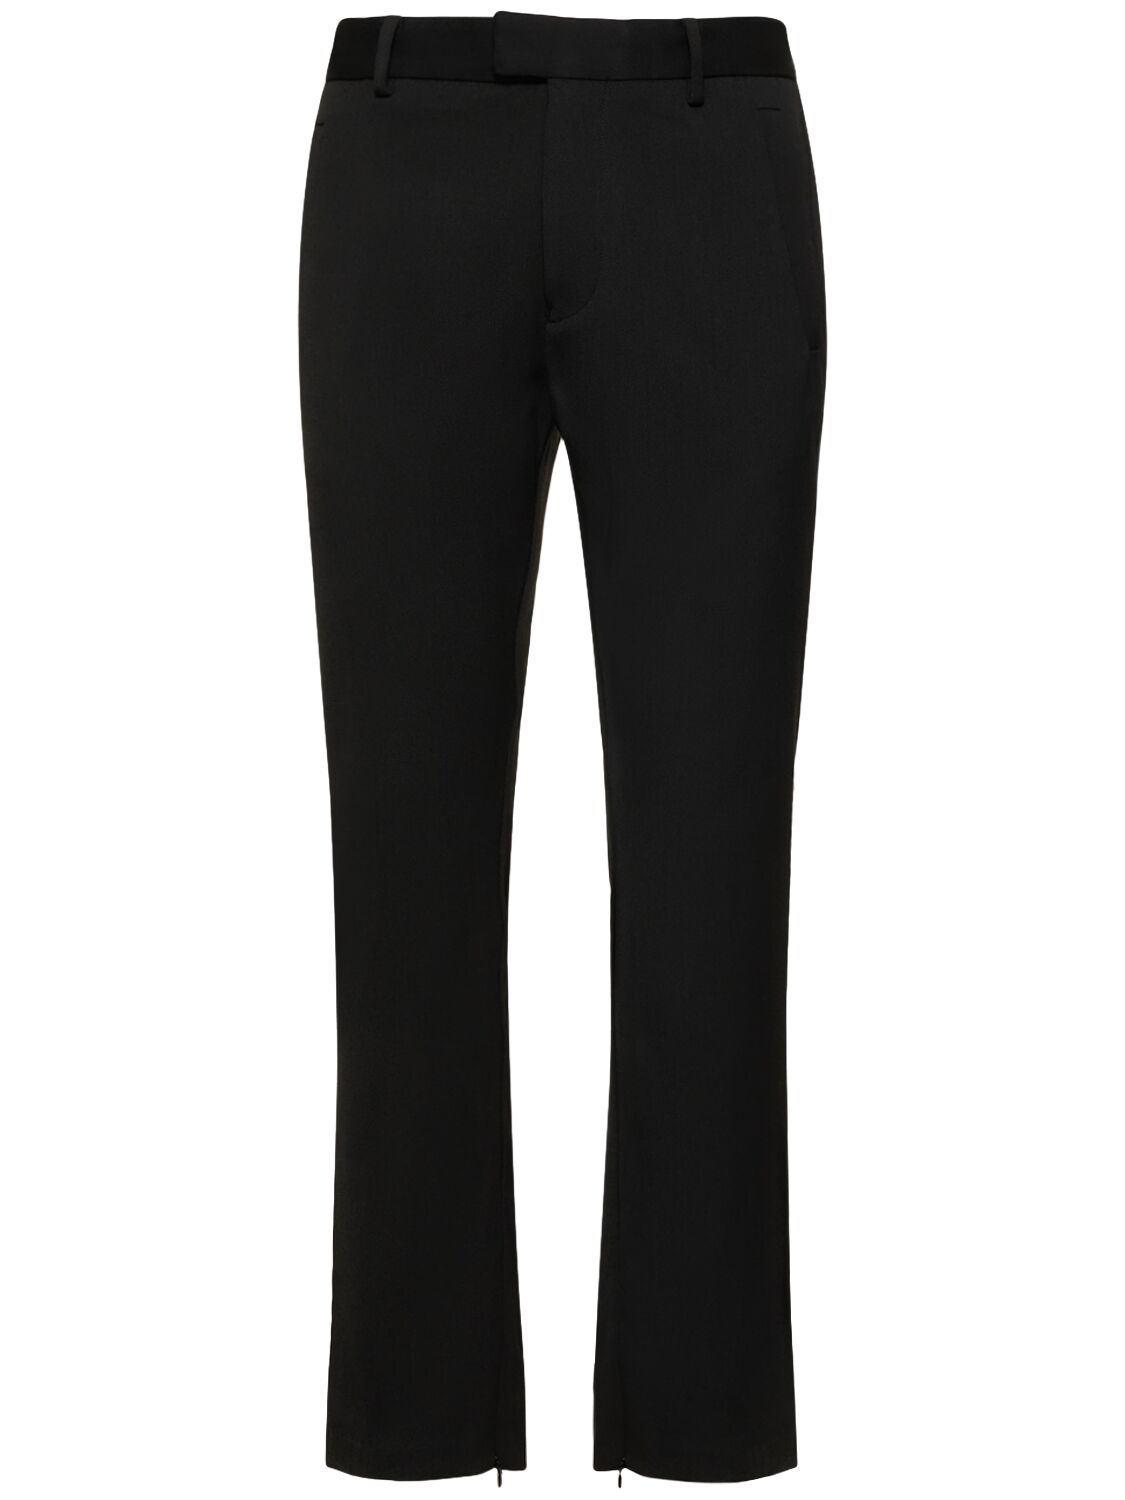 Image of Tailored Wool Blend Pants